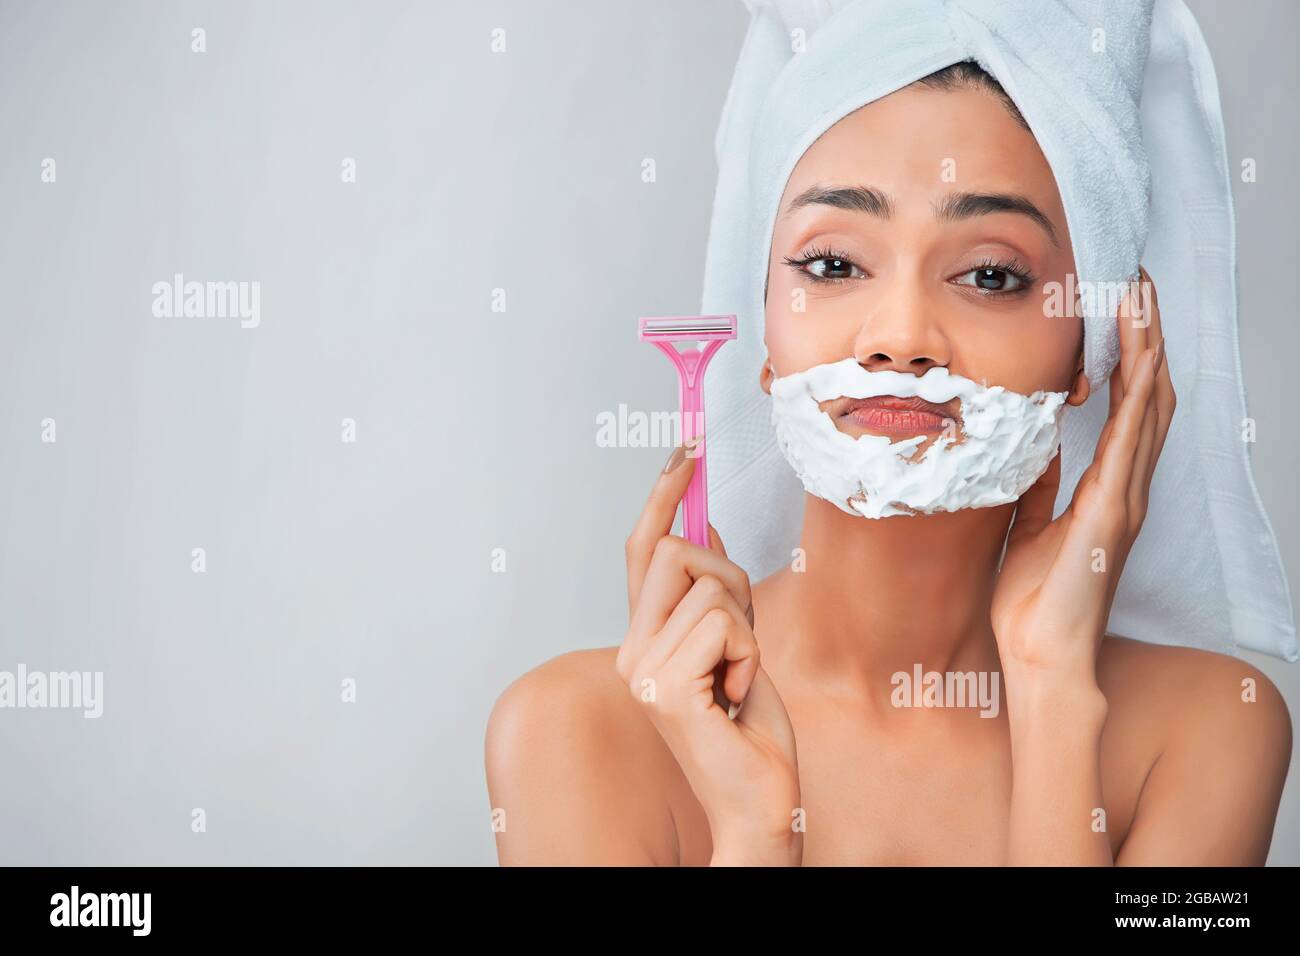 A young woman with hair removal cream on her face and razor in her hand. Stock Photo